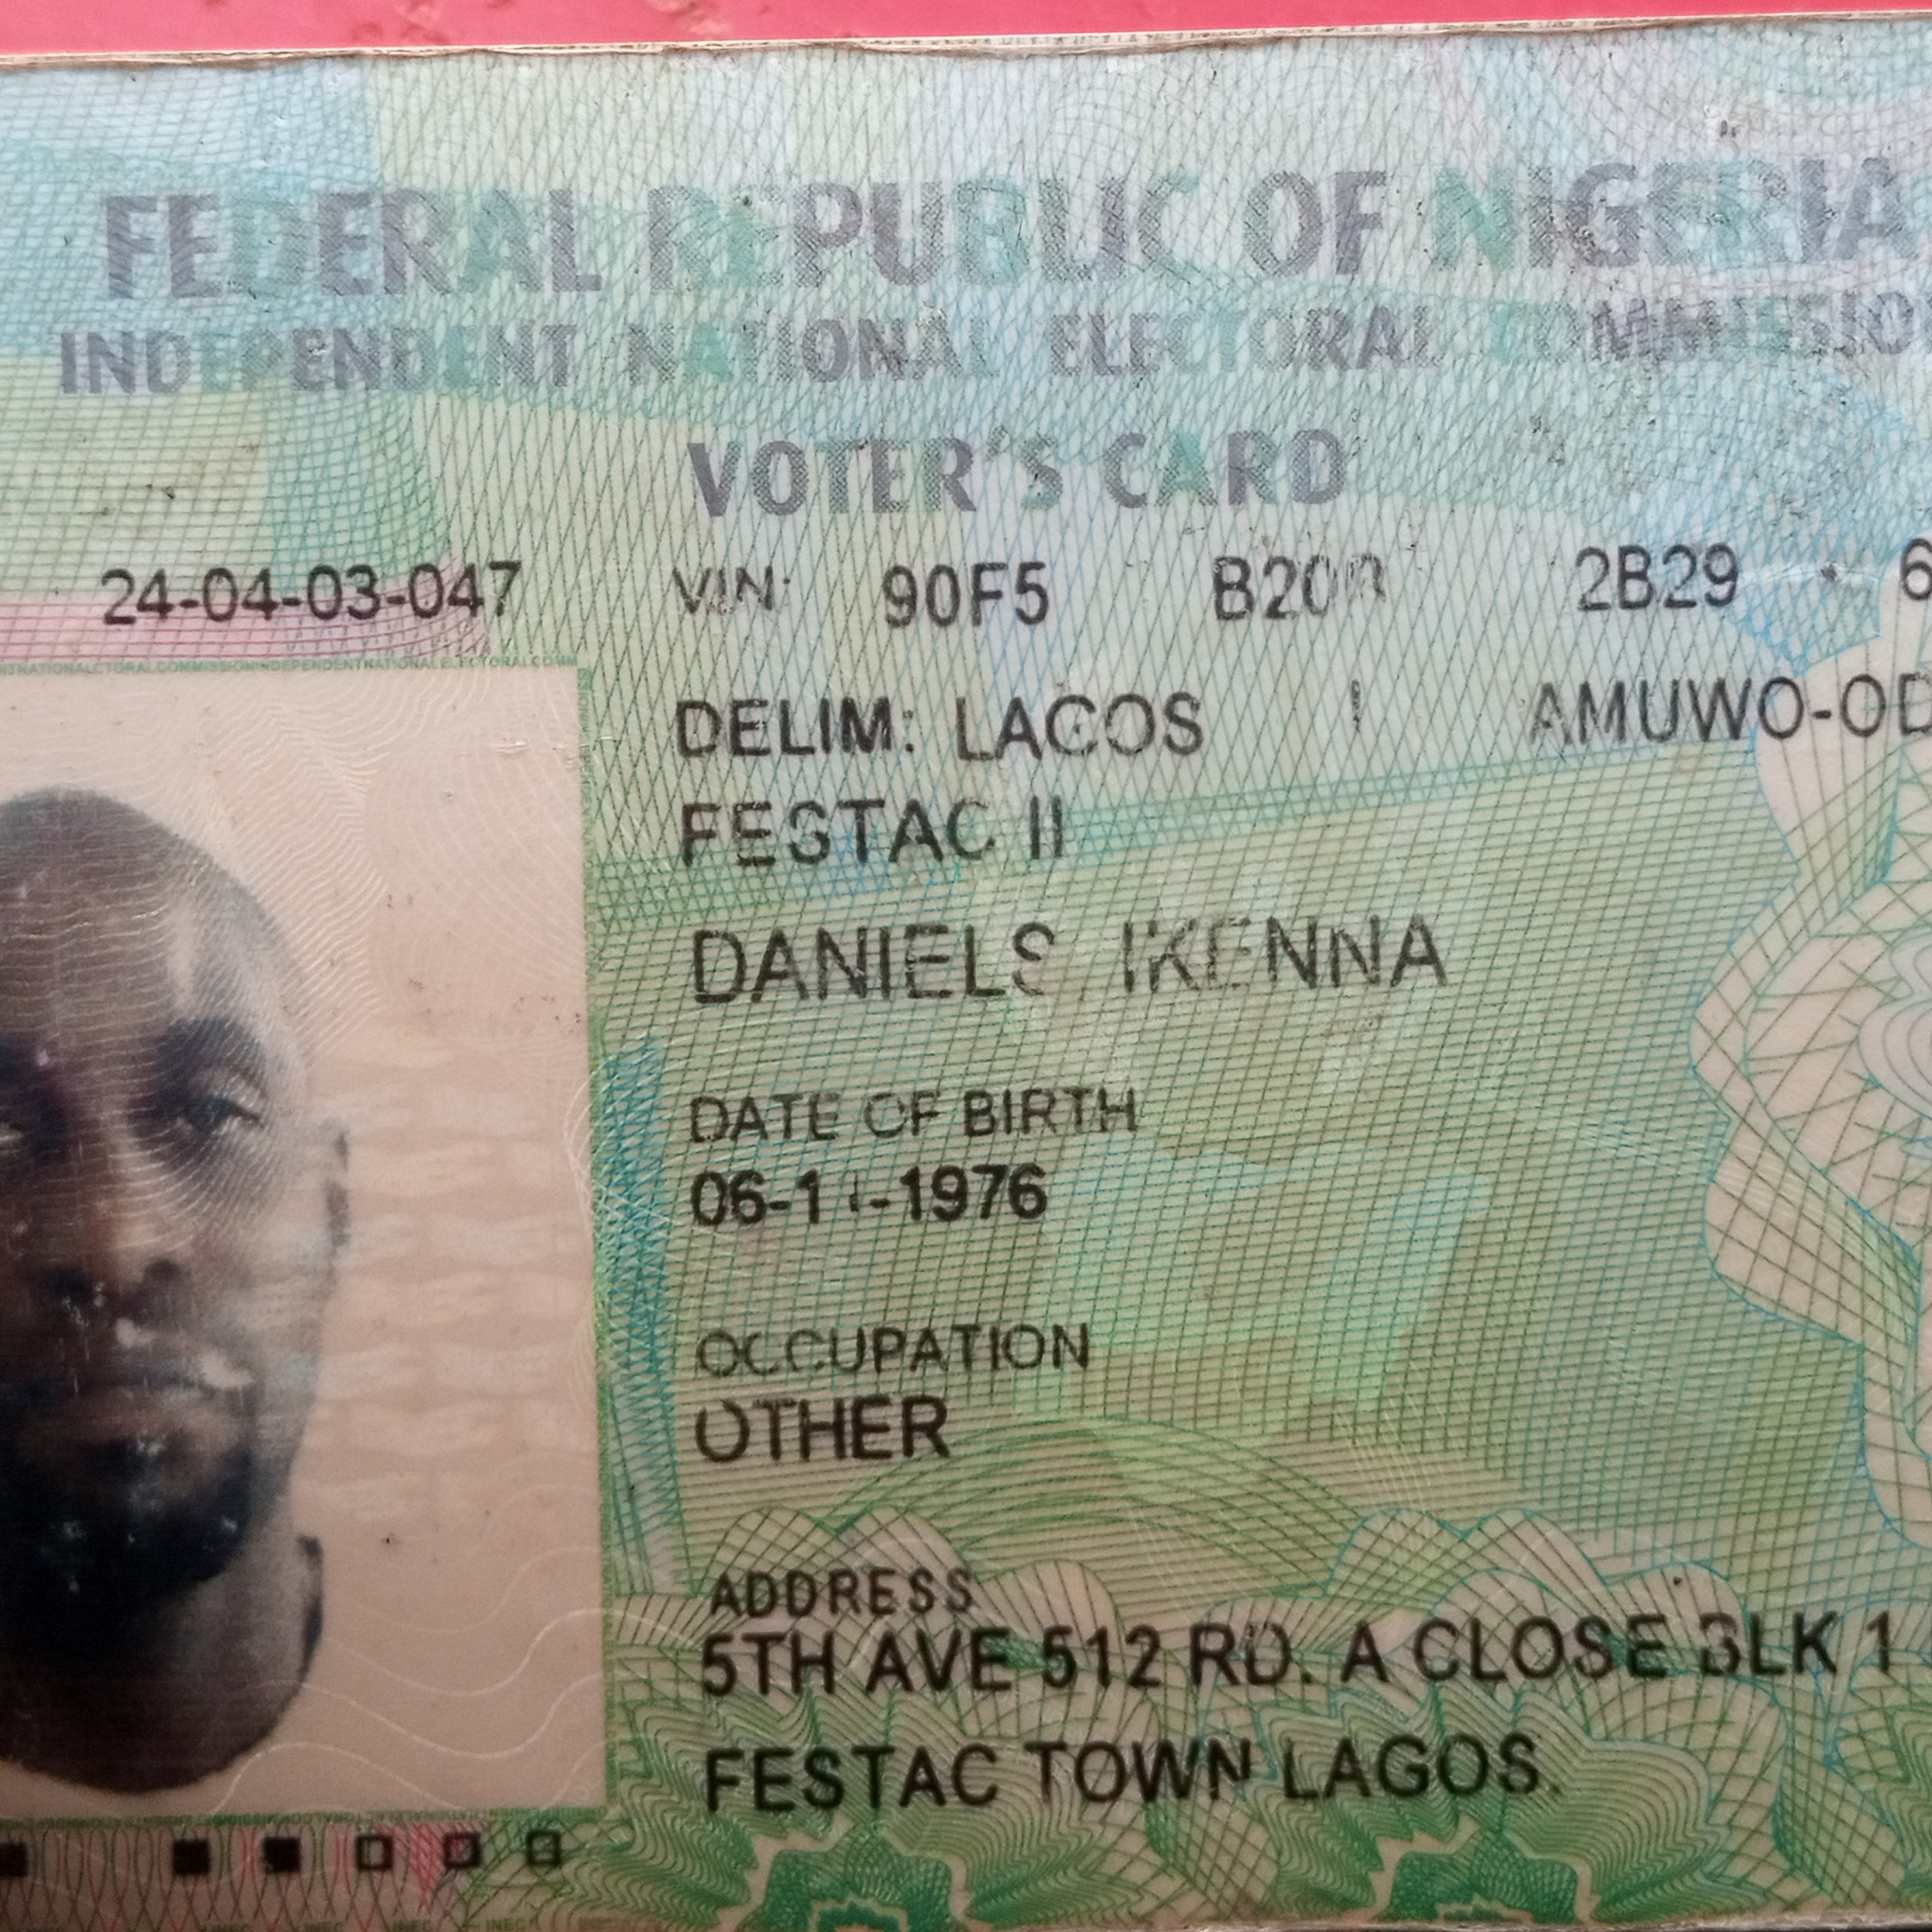 Yusuf's ID, a Nigerian Voter's Card, containing his name (the same name on his new email address, which I believe is his real name), listing his date of birth as 6th of November 1976 (or maybe 11th of June 1976) and showing the face of a forlorn-looking jet-black man, average weight, bald with a short beard, staring into the camera. And his address at 5th Avenue, 512 Rd., A Close, Block 1, in Festac Town, Lagos, corresponding to the Moneygram receiver information which he had provided to Jeb. So, a real ID, with his real name, photo, and address.